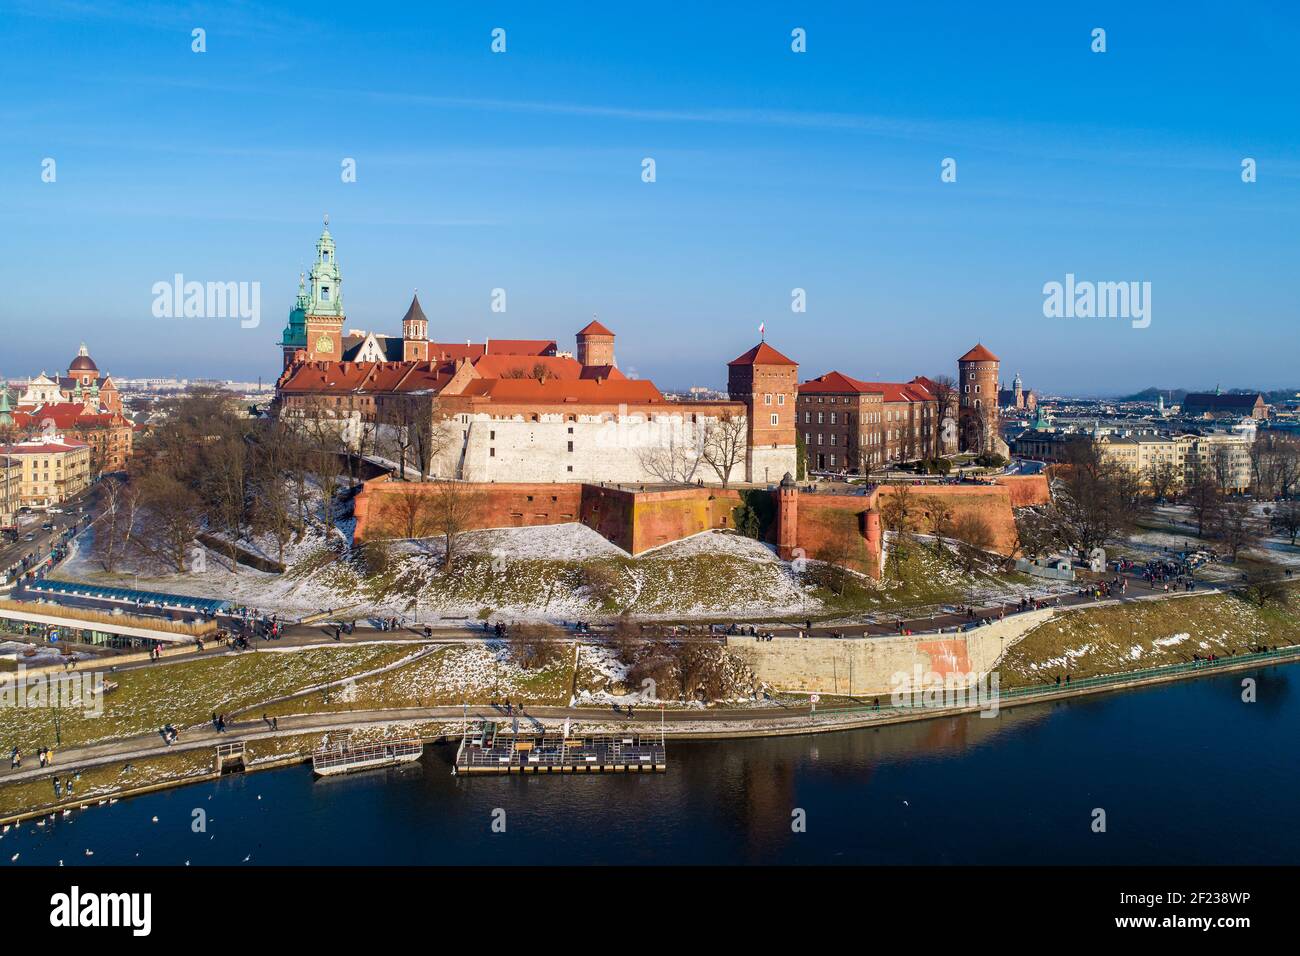 Historic royal Wawel Castle and Cathedral in Krakow, Poland, with Vistula River, promenade, walking people and swans in winter Stock Photo